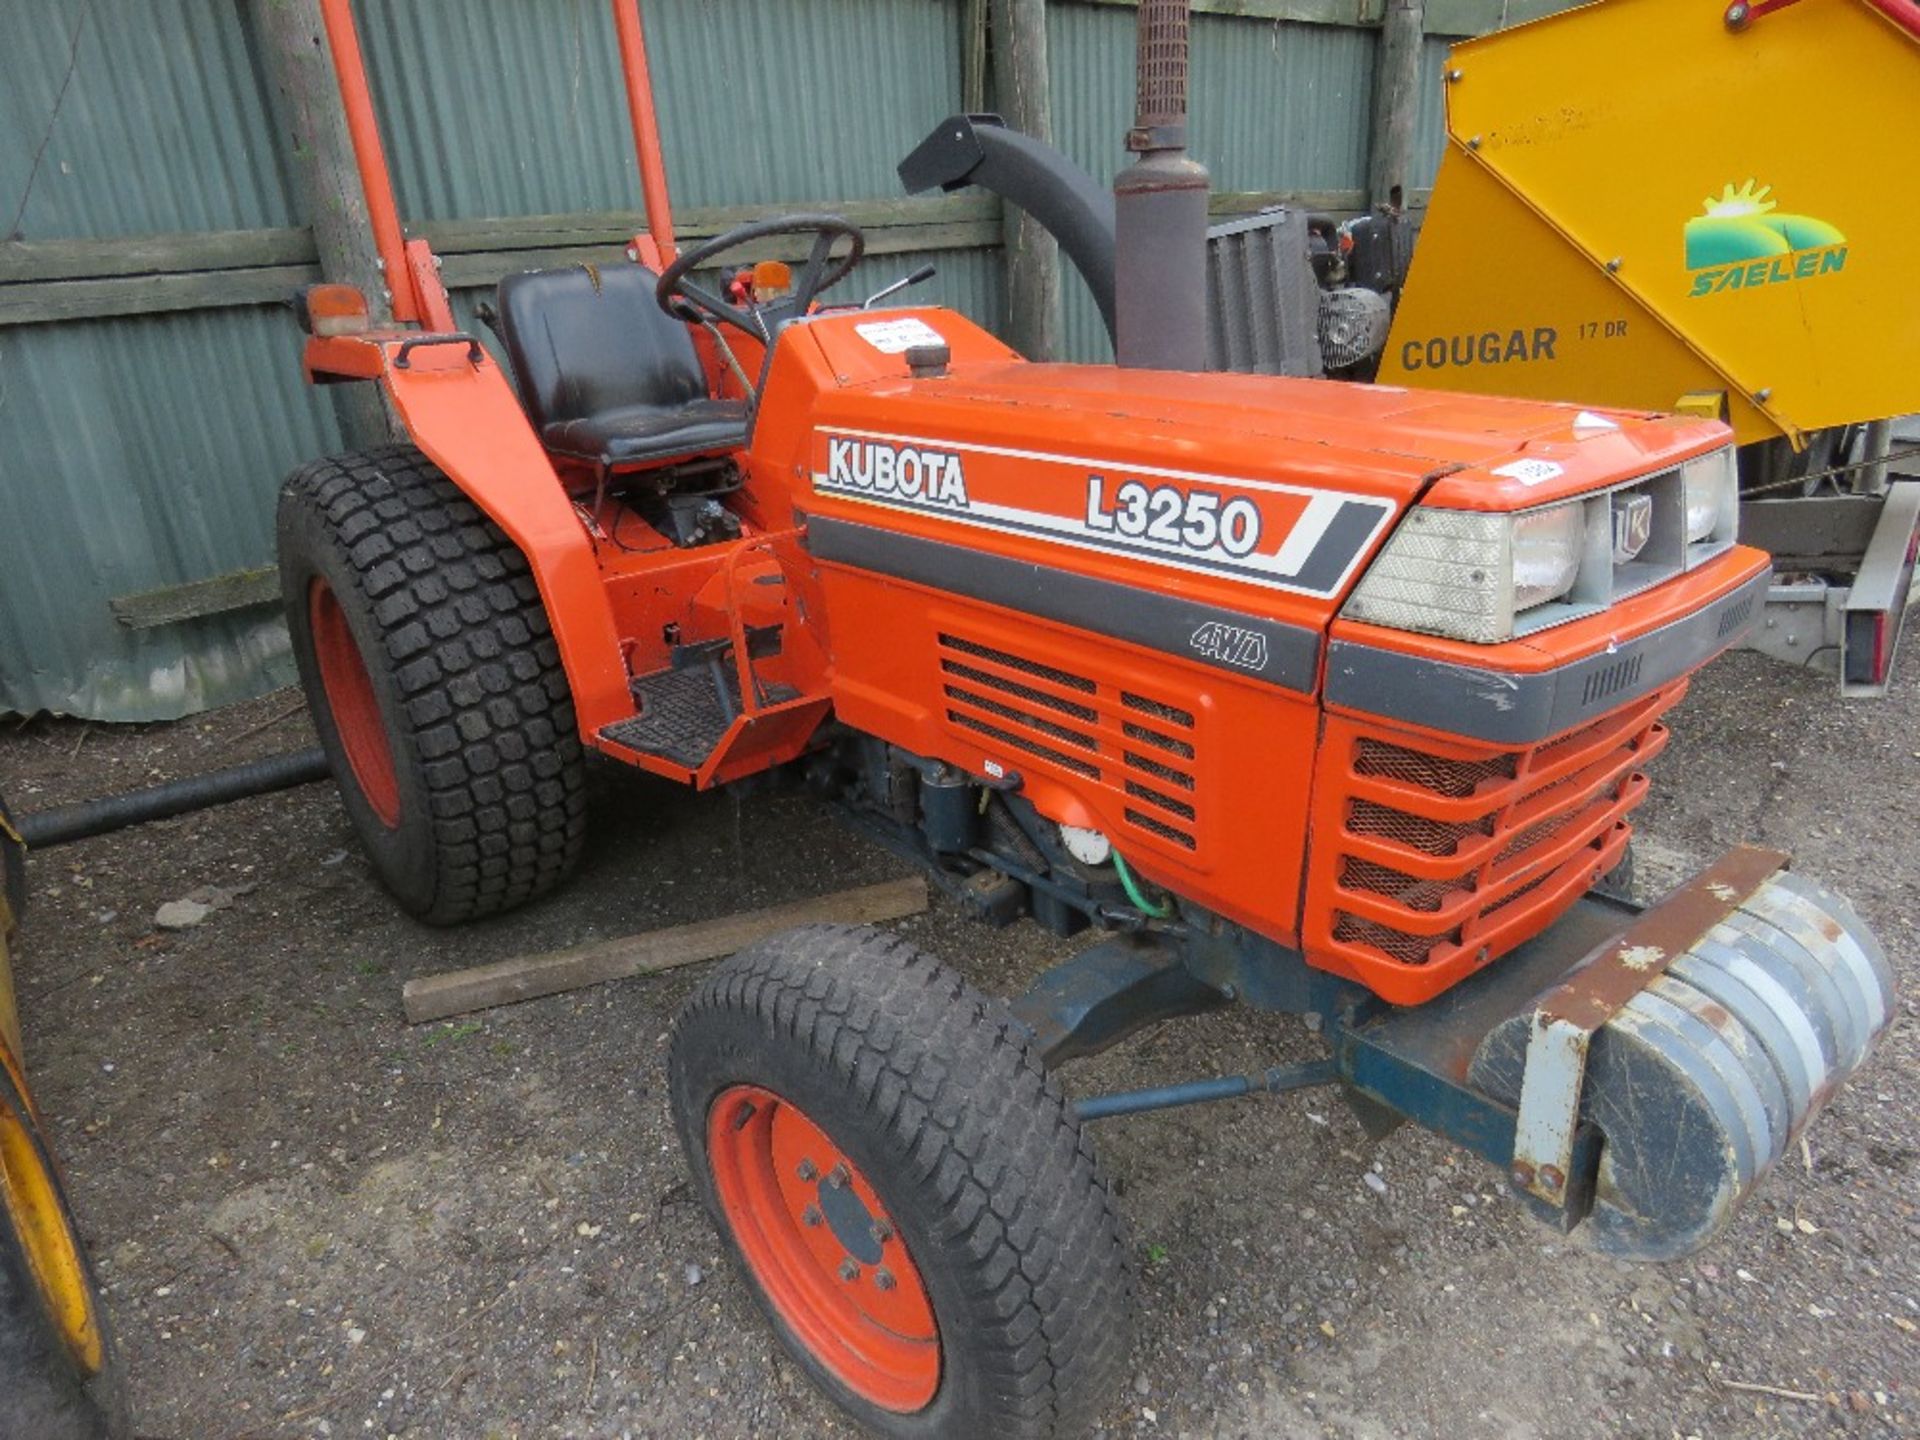 KUBOTA L3250 4WD TRACTOR ON GRASS TYRES. 4080 REC HOURS. SHUTTLE GEARBOX. SN:51408. WHNE TESTED WAS